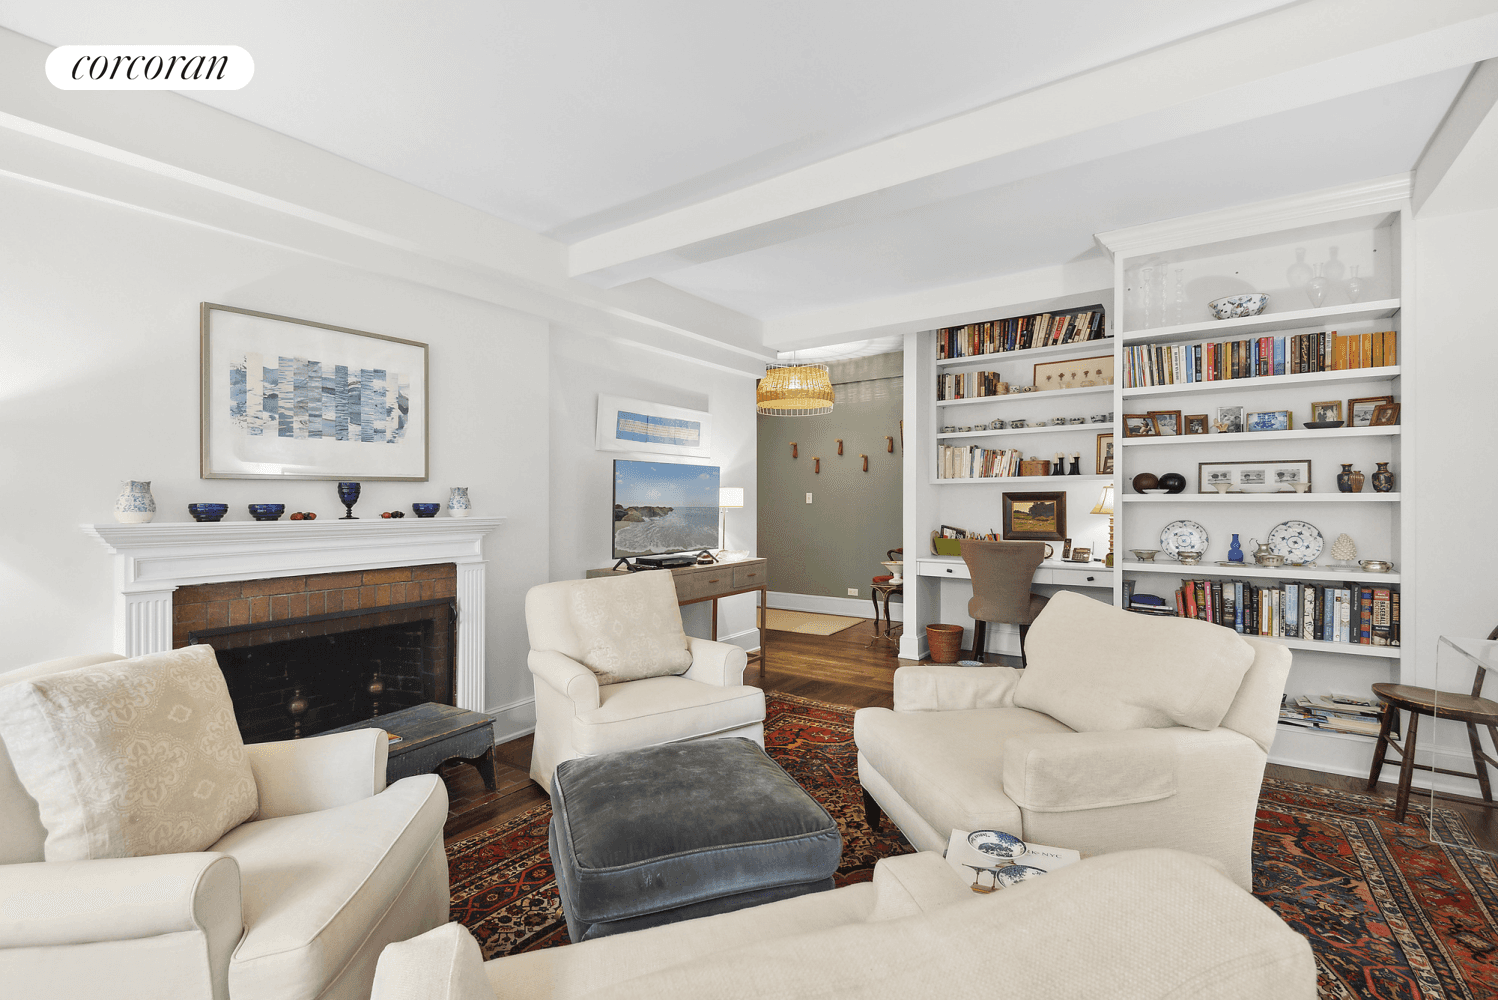 Renovated, renowned, and move in ready, this Junior Four converted to a two bedroom is located at 424 East 52nd Street in The Southgate, an Emery Roth luxury pre war ...